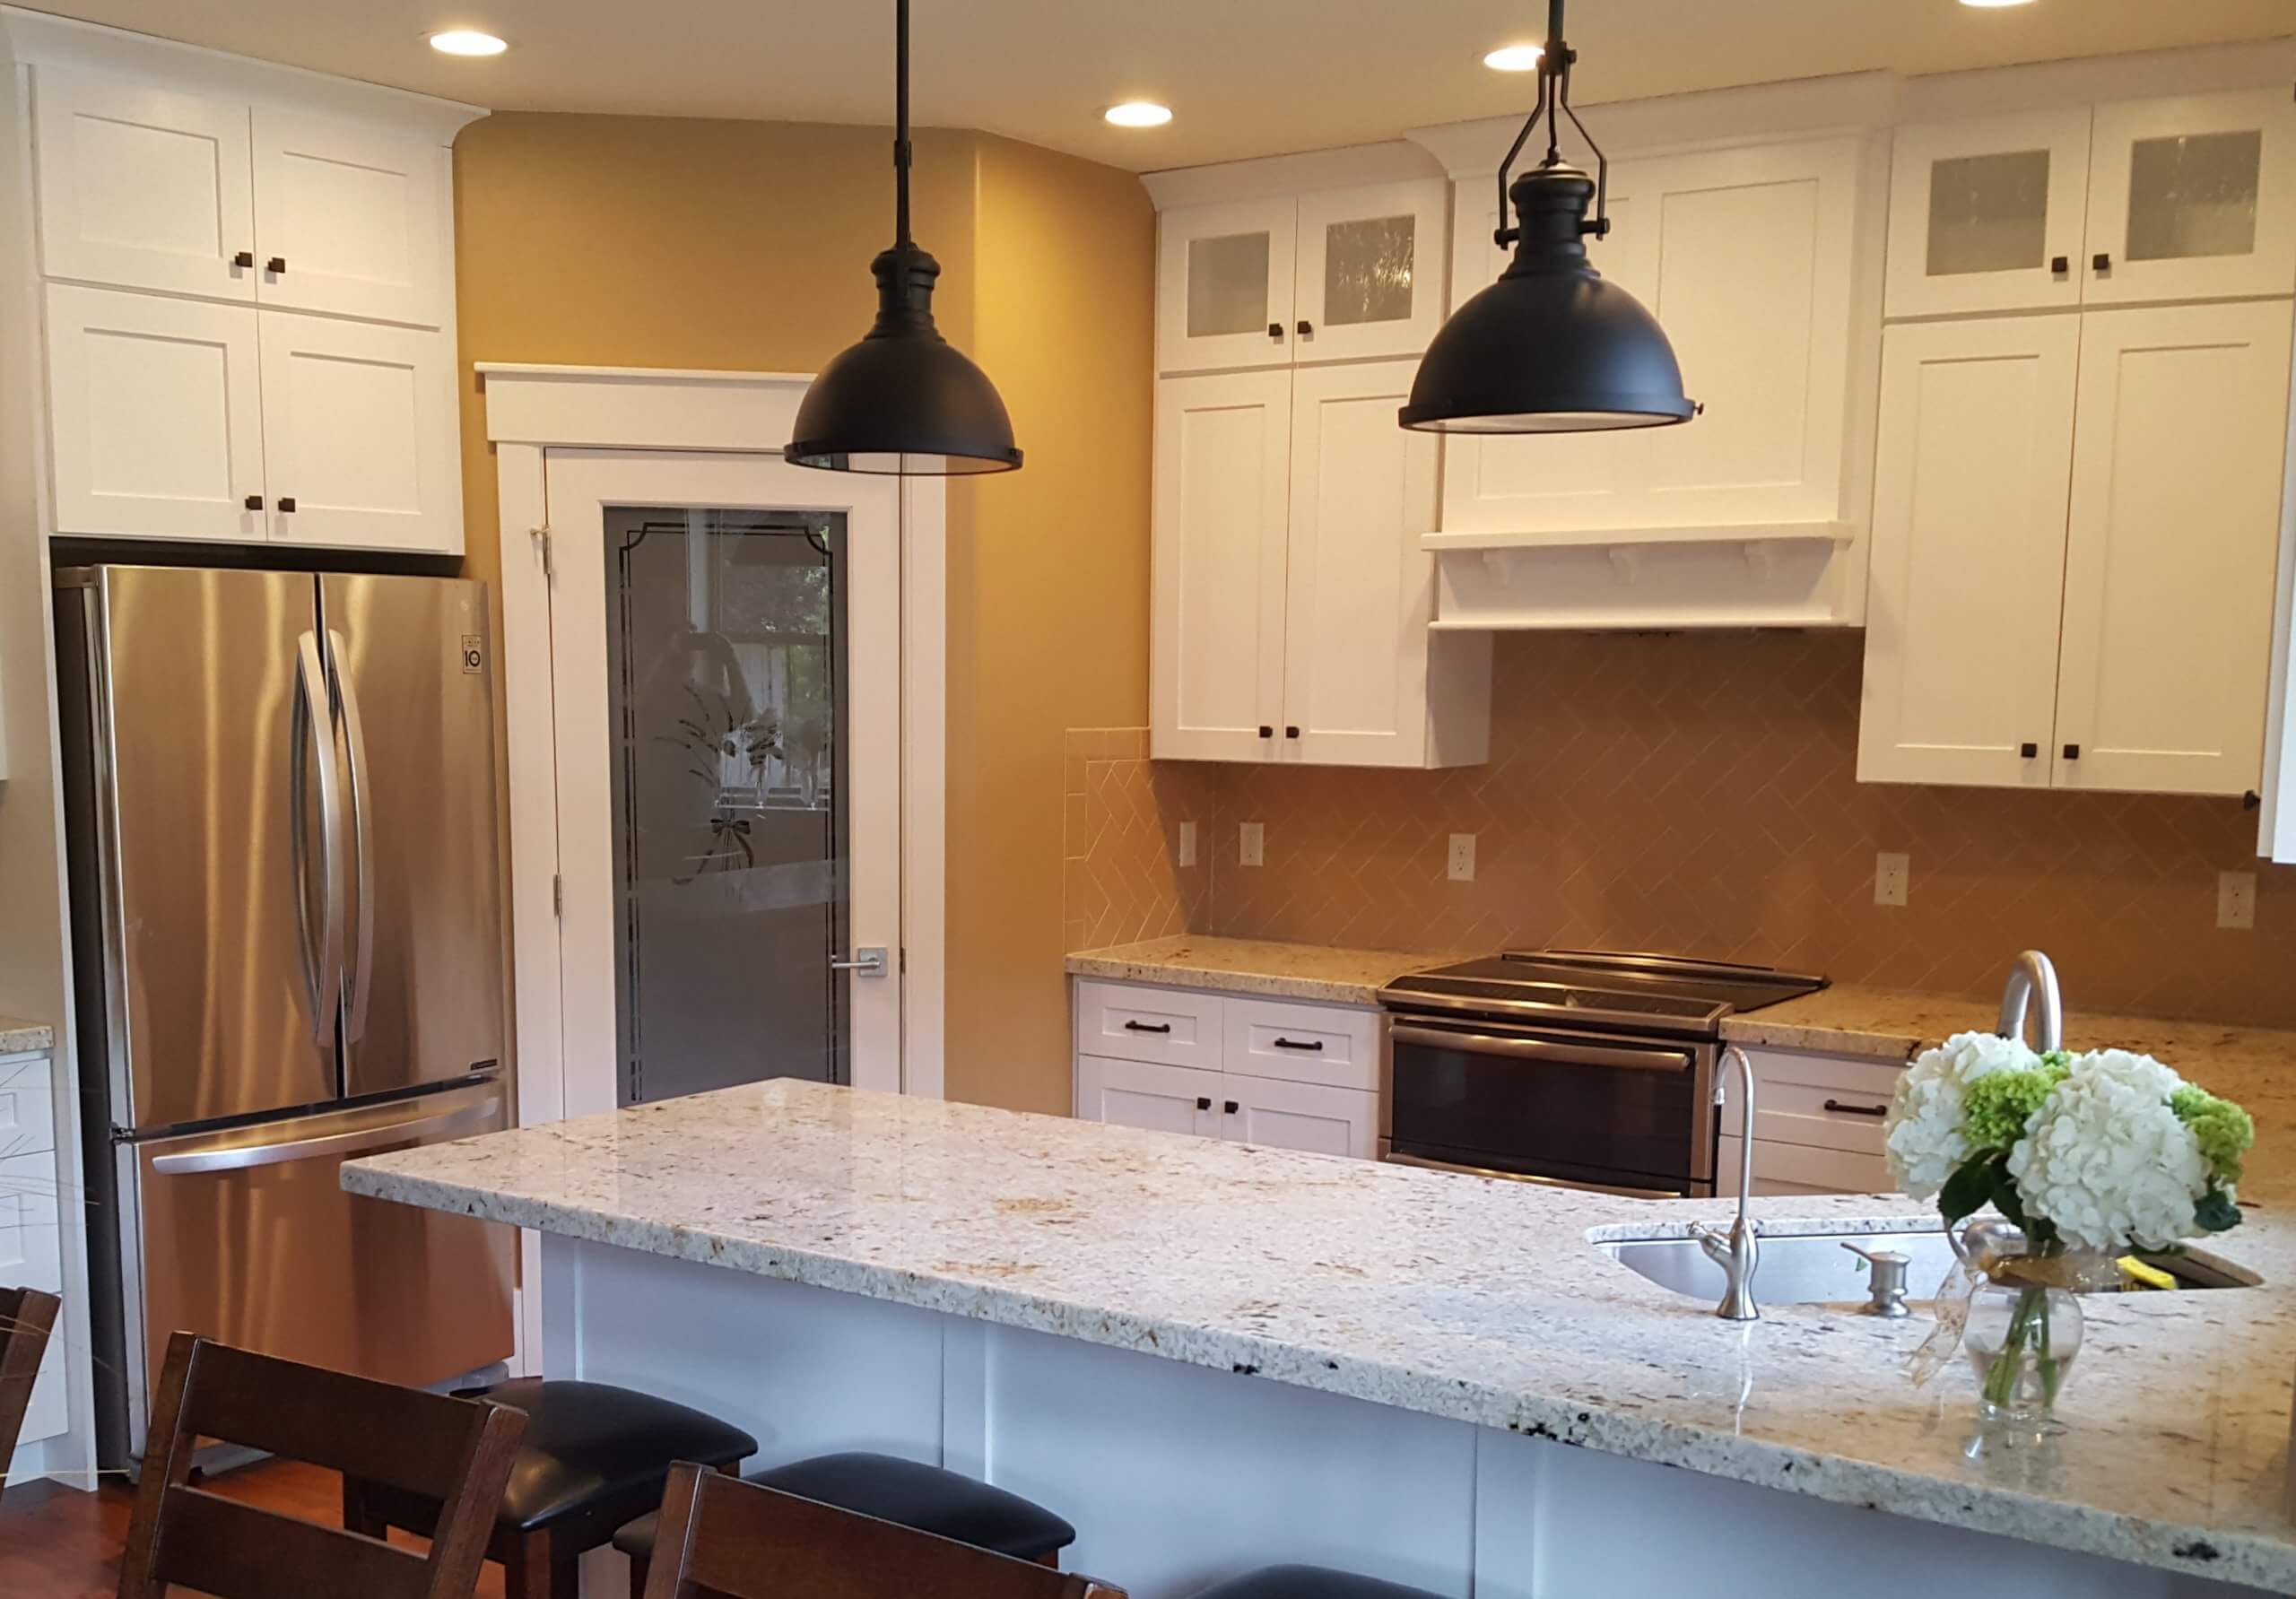 3 Tips for Selecting Kitchen Cabinets